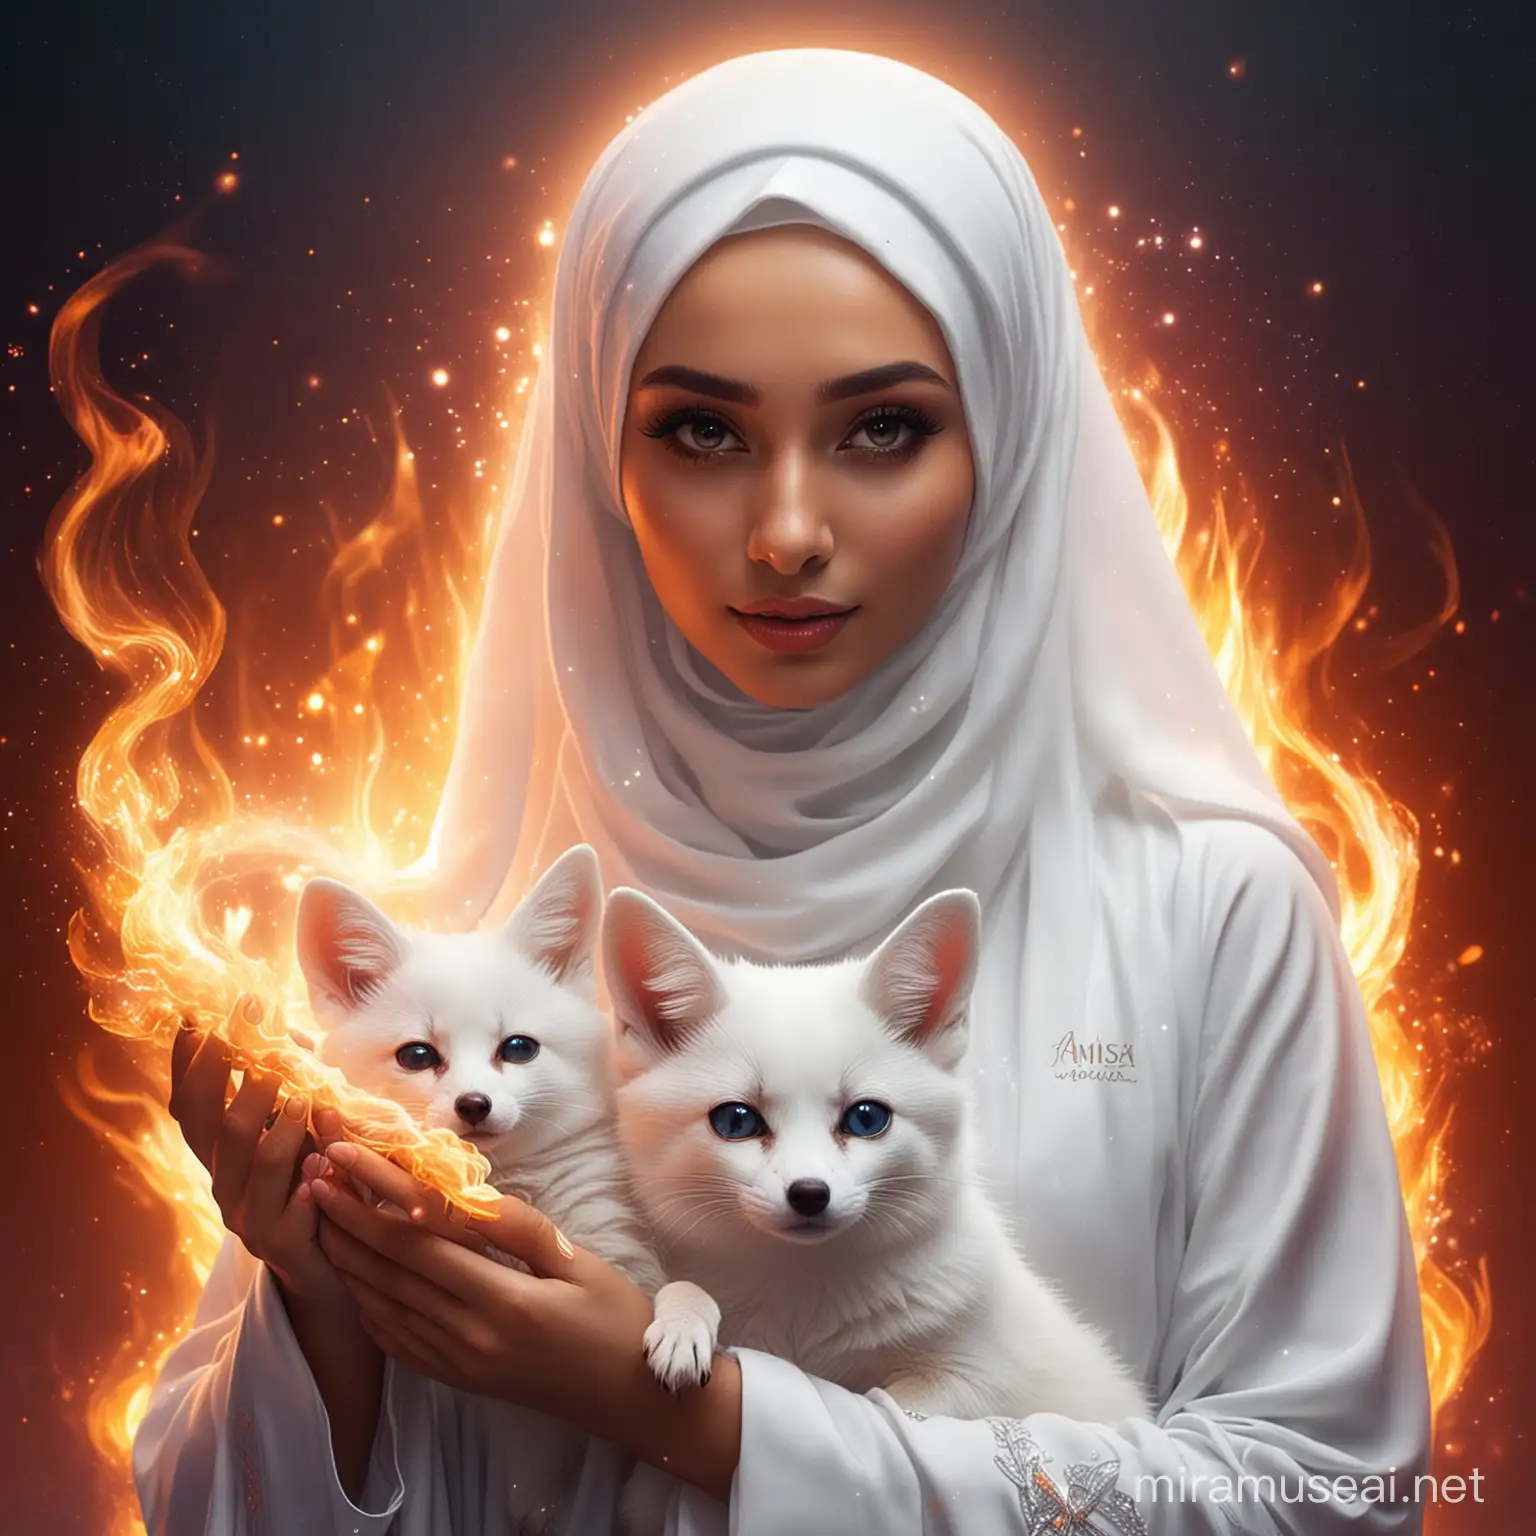 Majestic Hijab Girl with White Fennec Fox in Holographic Flames